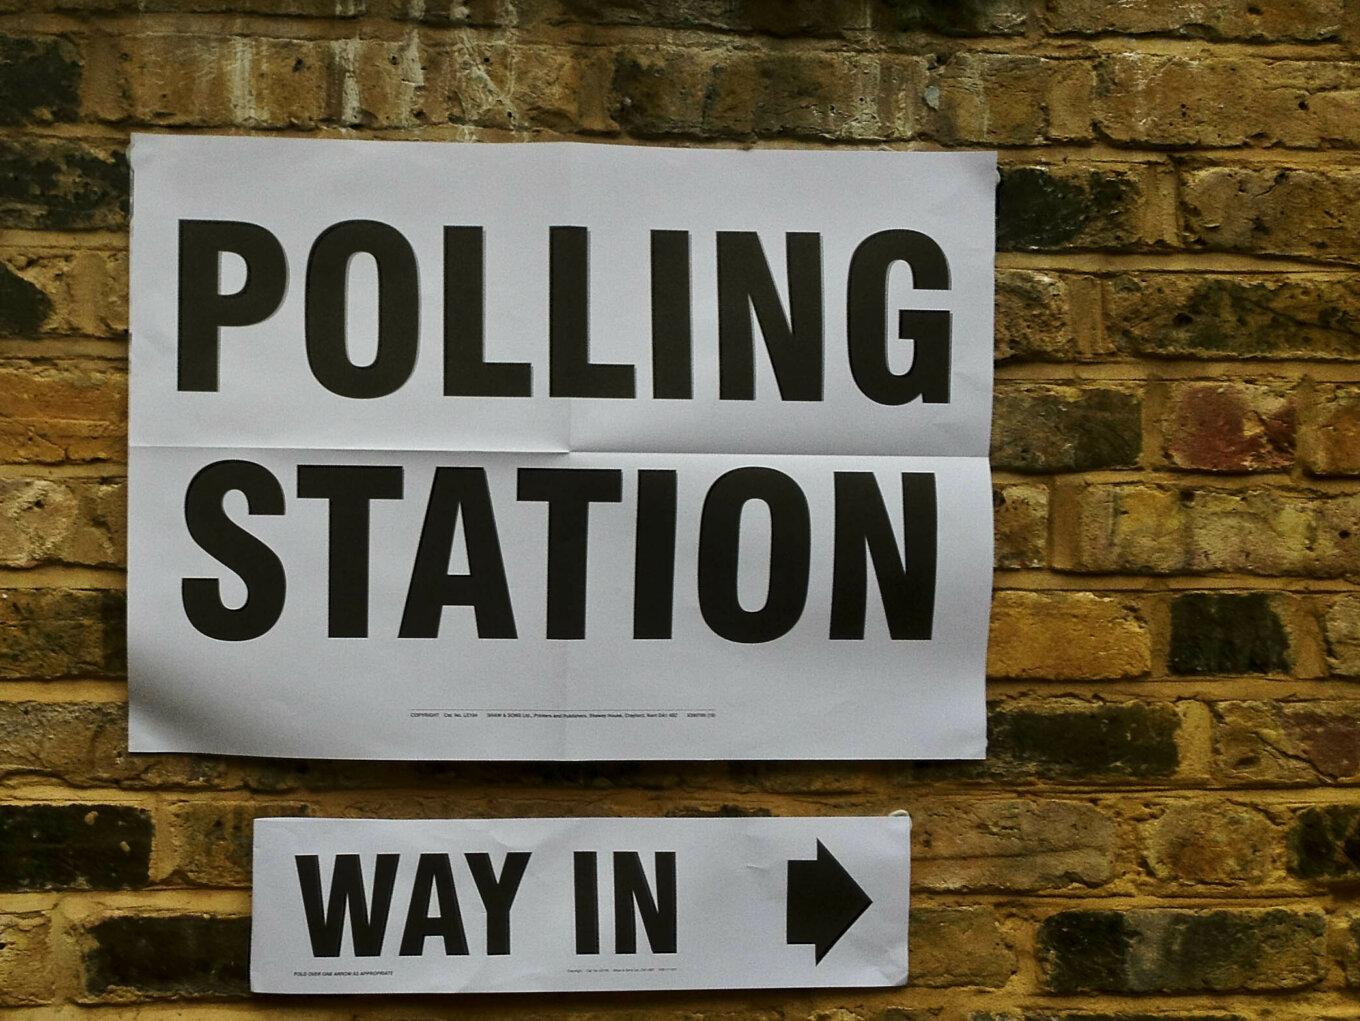 A brick wall with a Polling Station sign